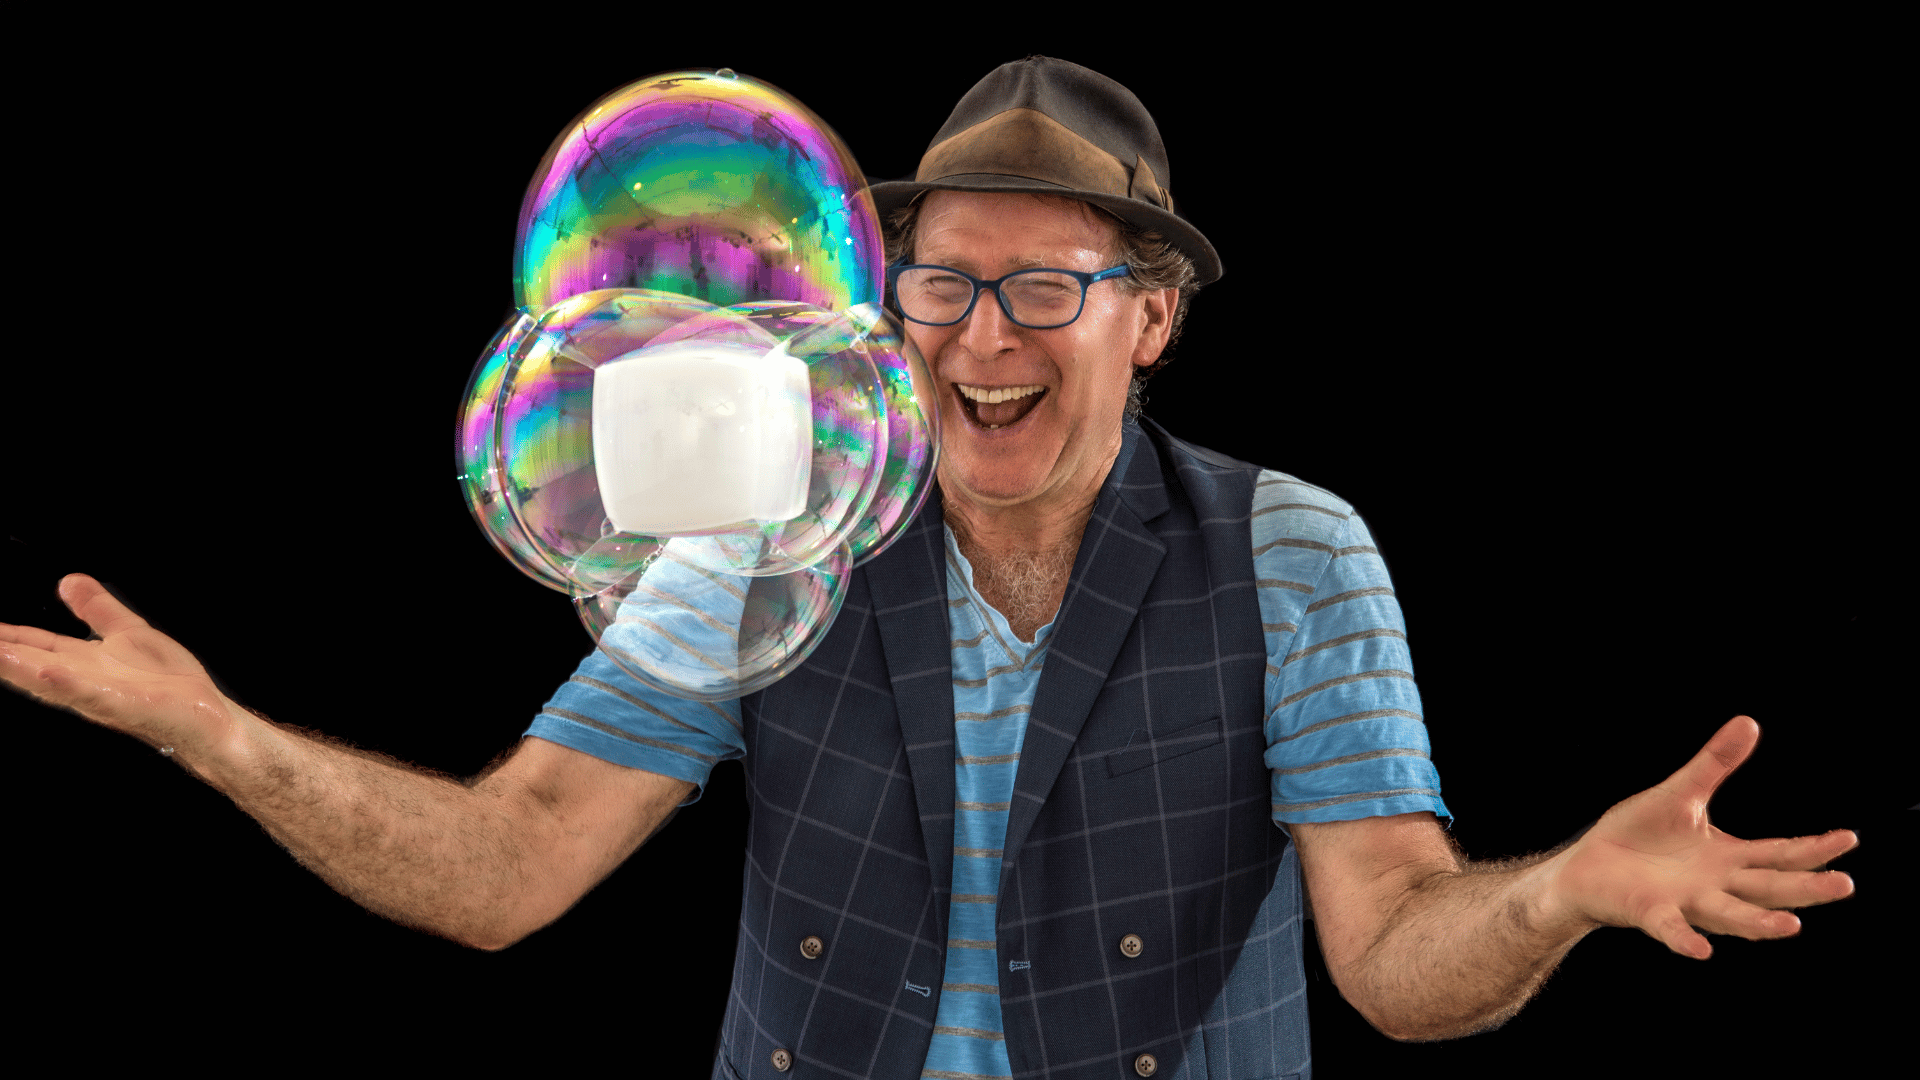 The Amazing Bubble Man has created a floating cube inside a collection of bubbles!